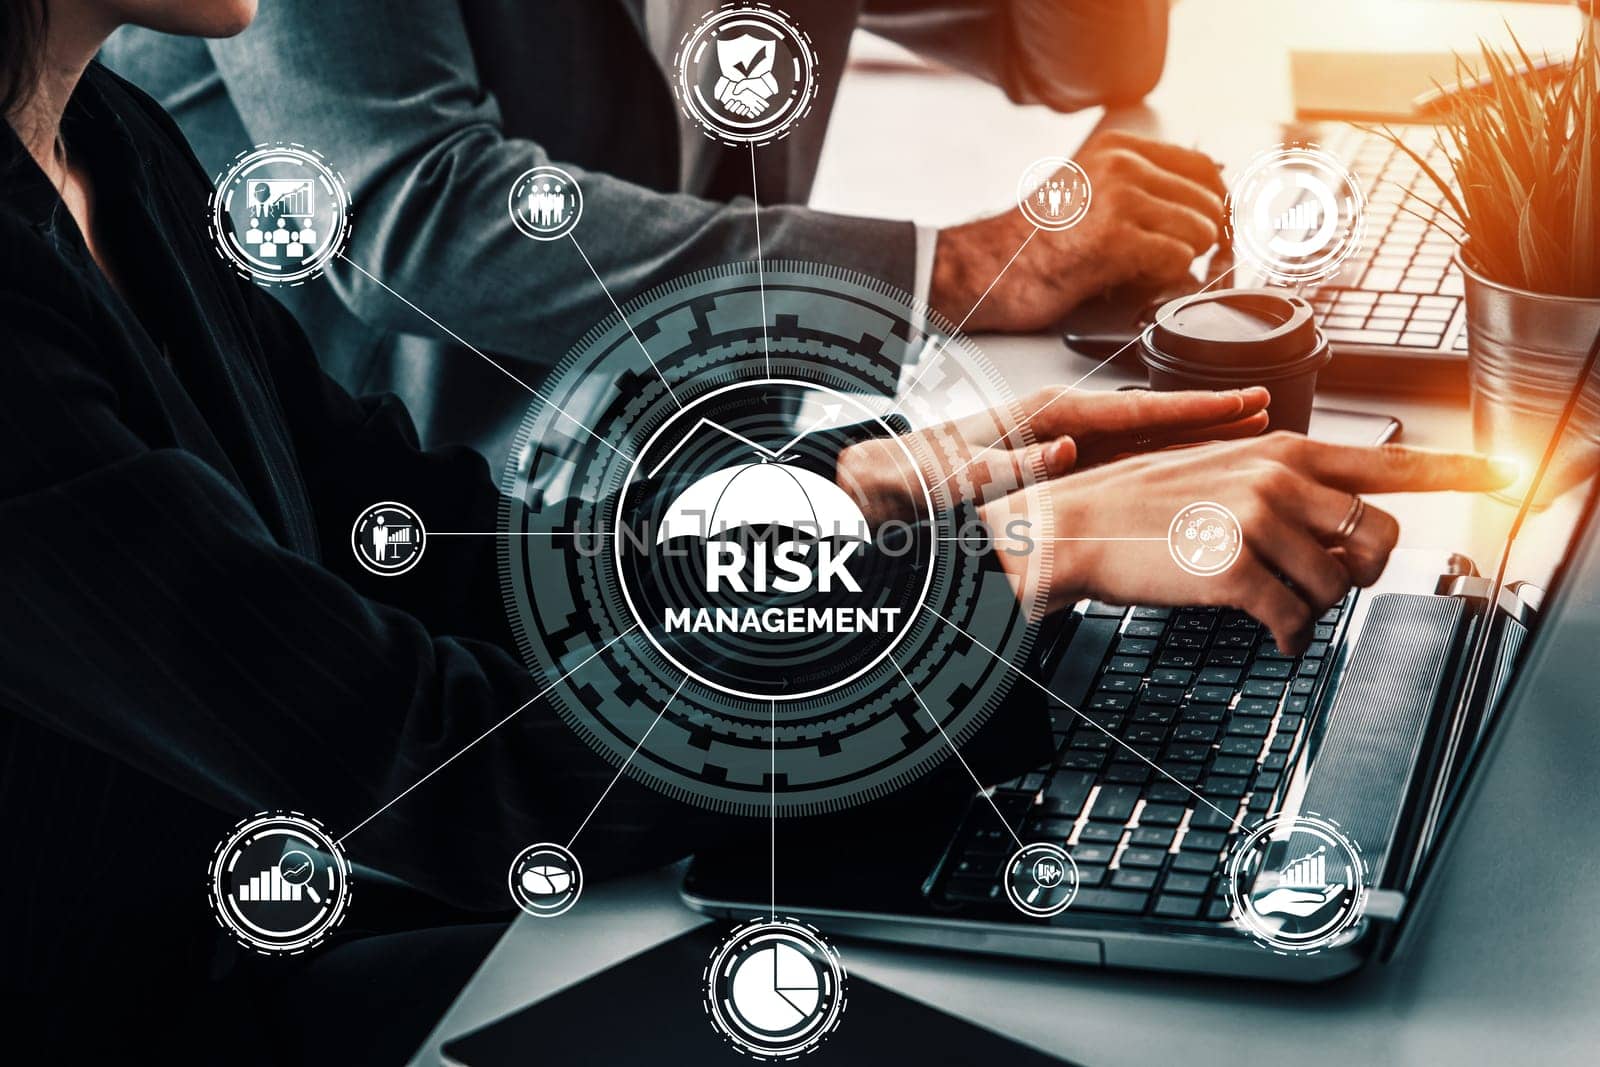 Risk Management and Assessment for Business uds by biancoblue